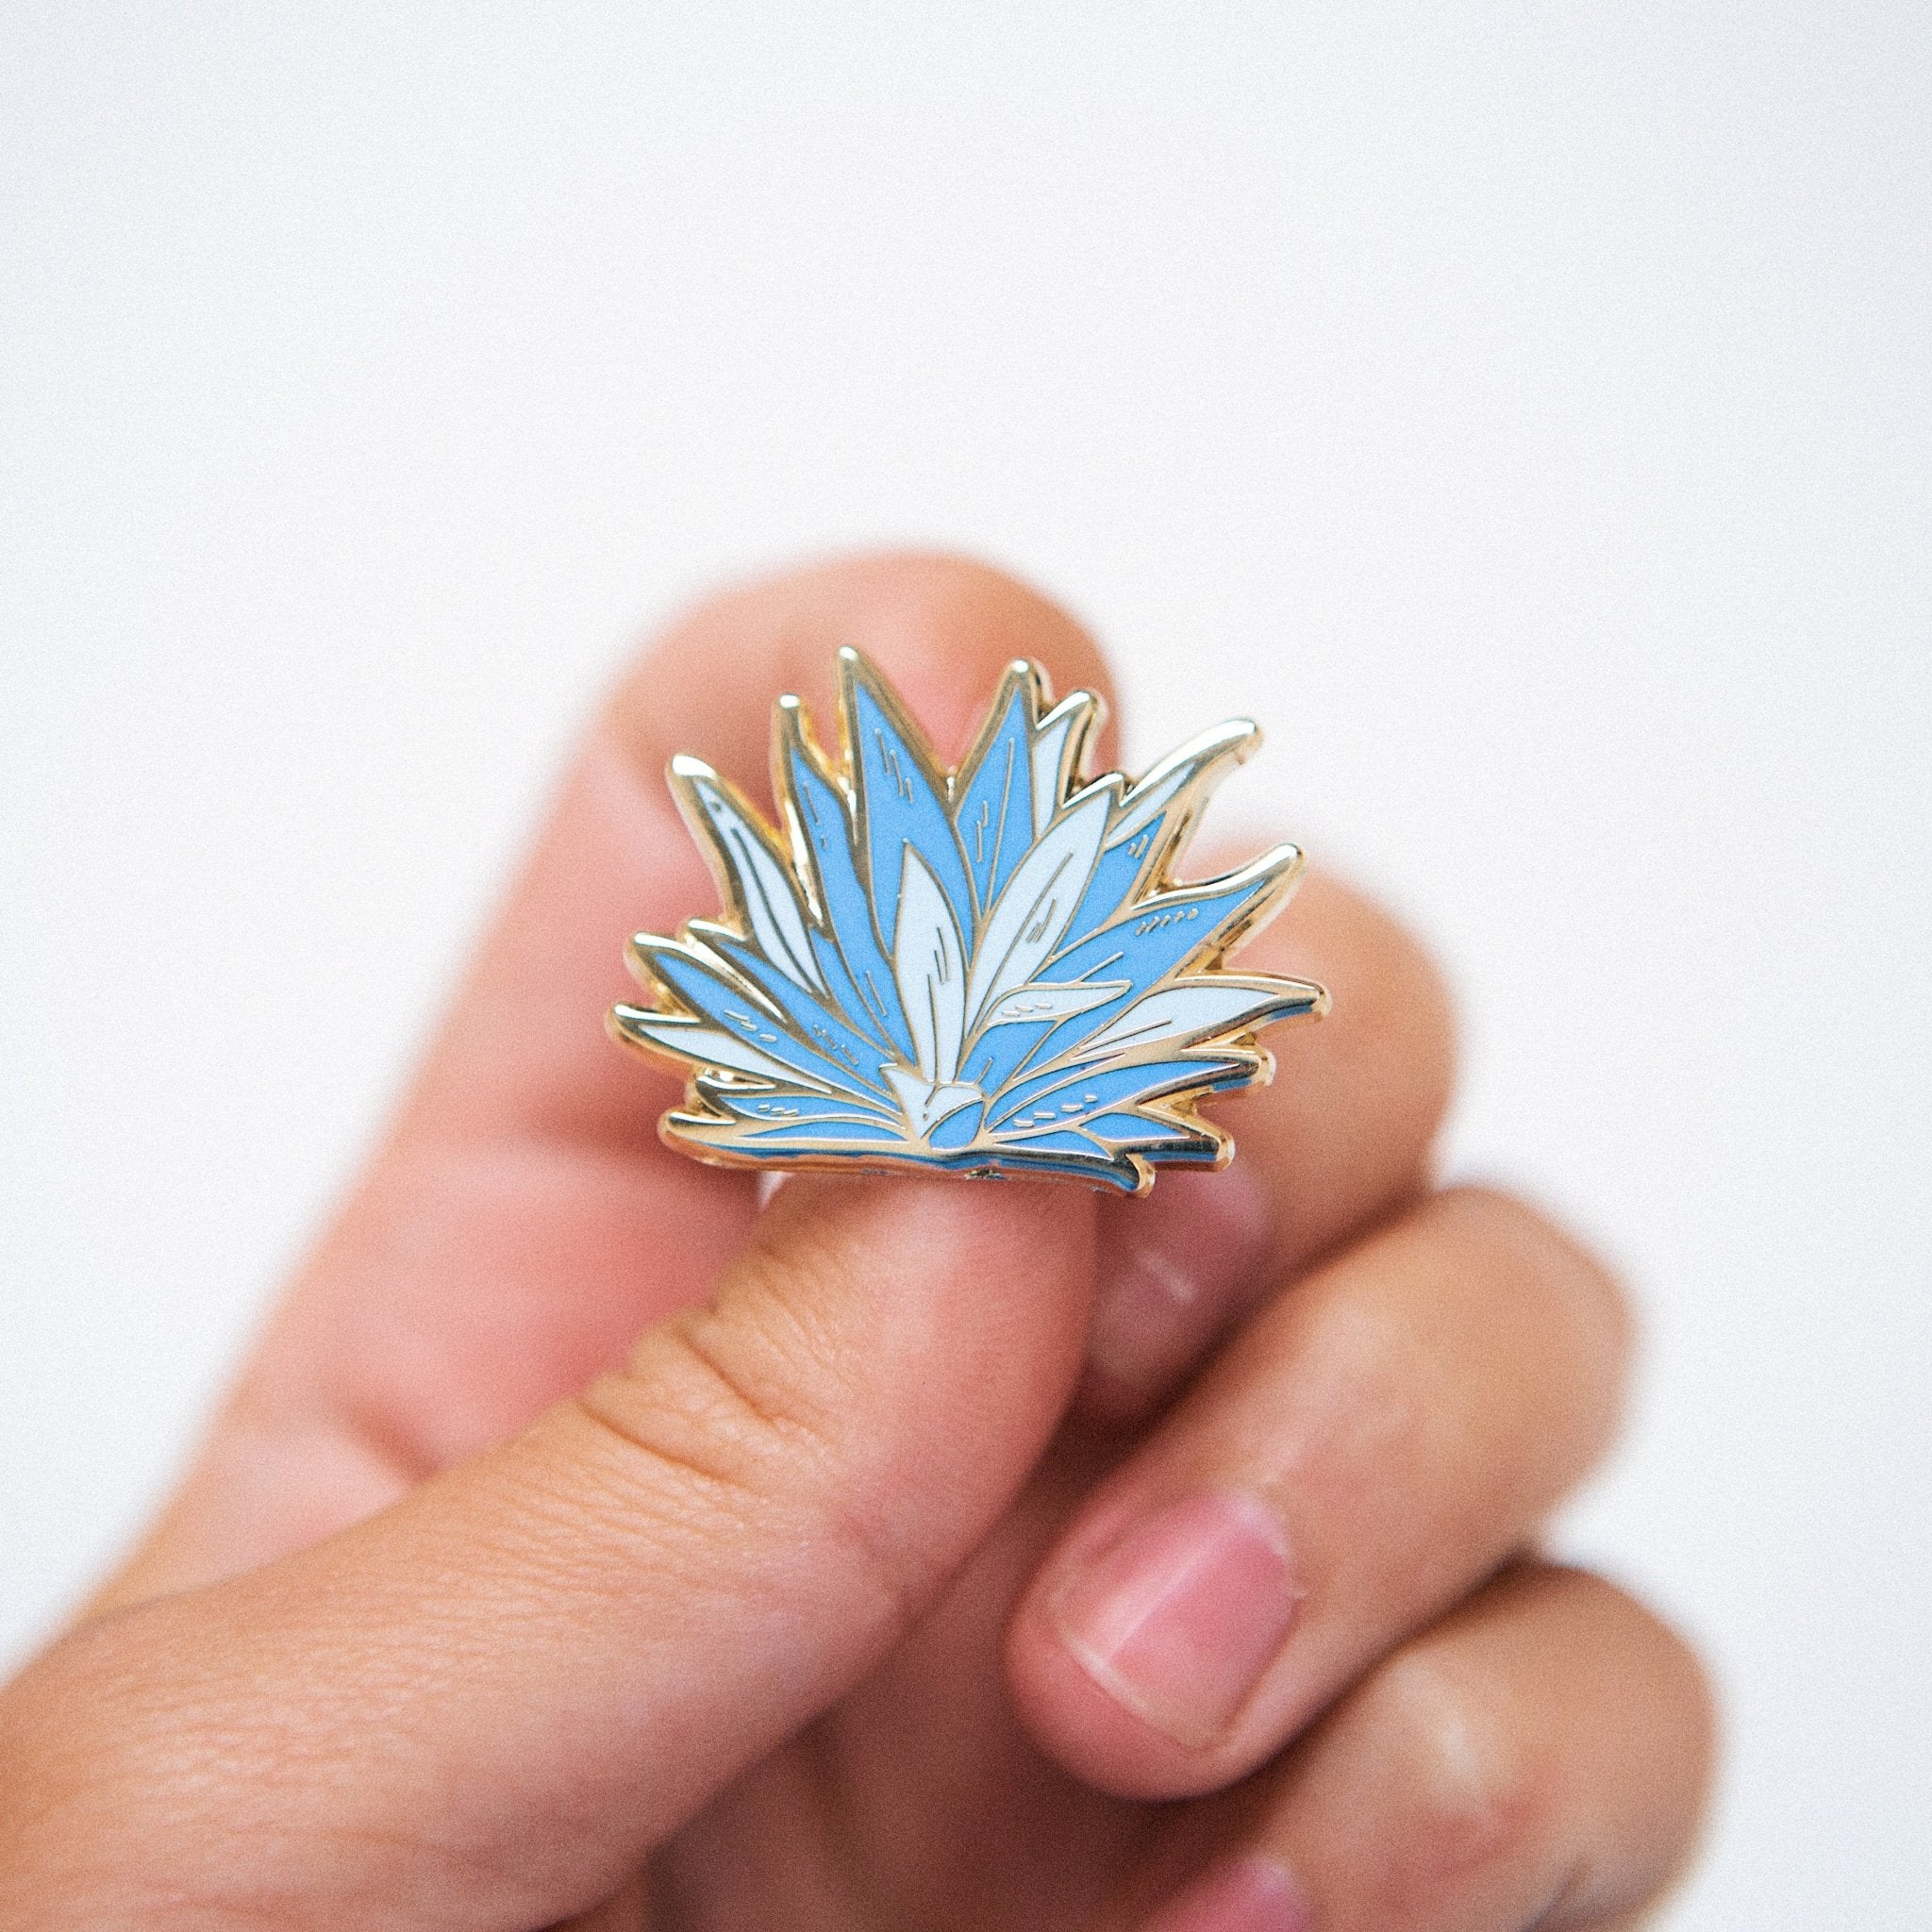 a hard enamel pin of a Blue Agave plant in blue color with gold metal plating